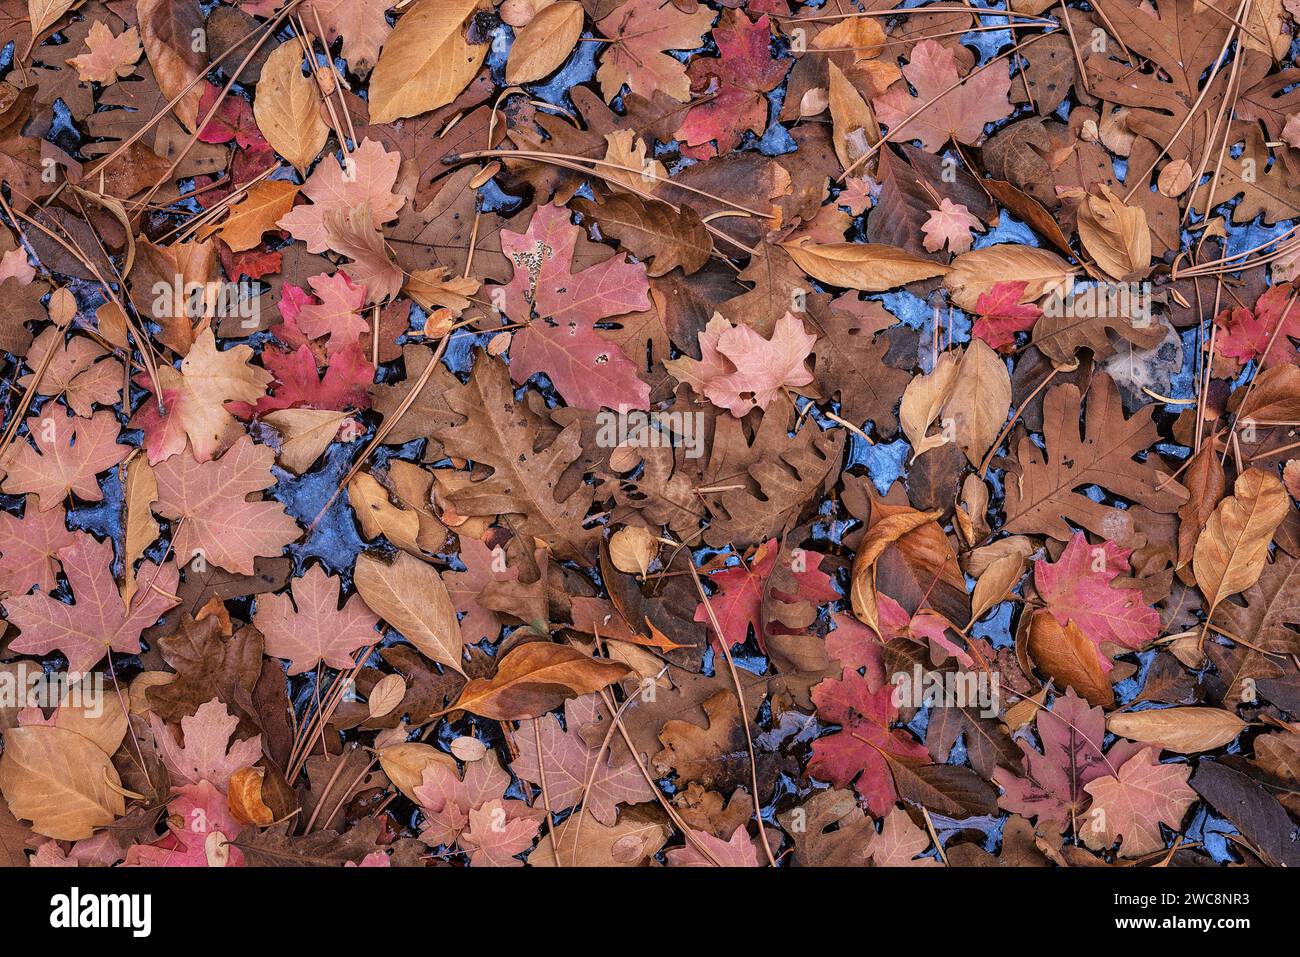 Colorful autumn leaves resting on water with blue sky reflected in Zion National Park, Utah Stock Photo